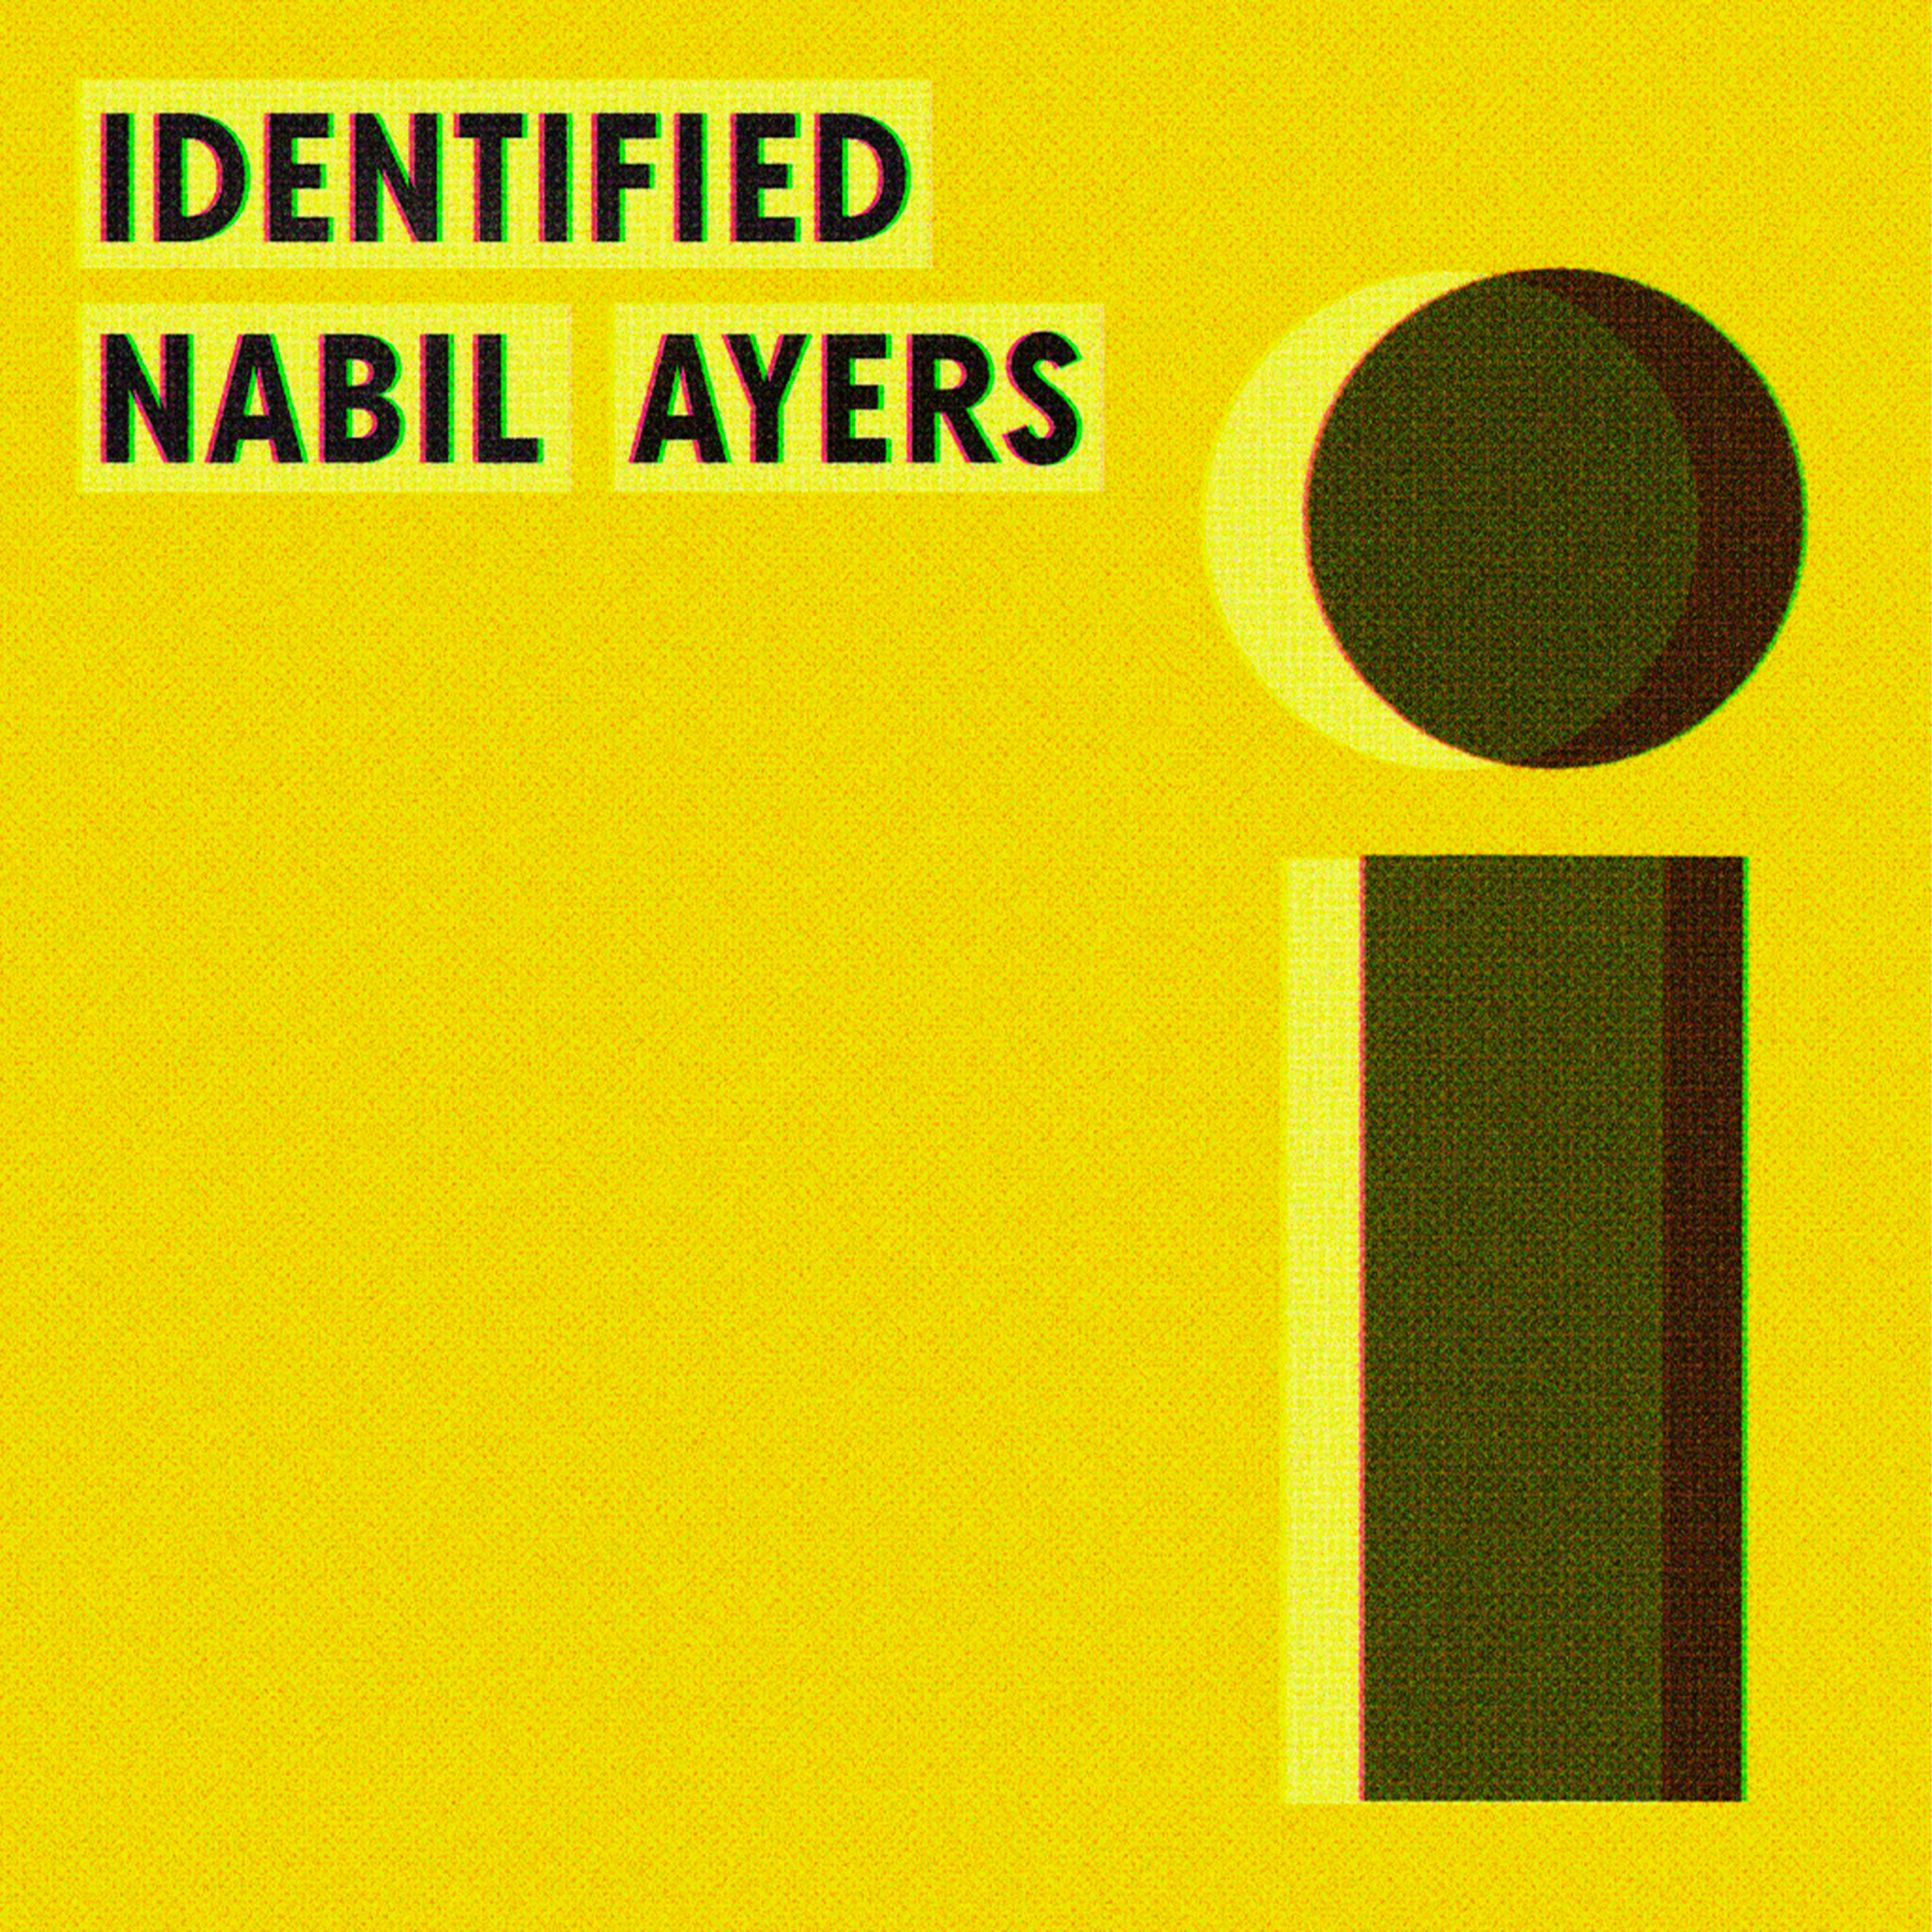 Identified with Nabil Ayers